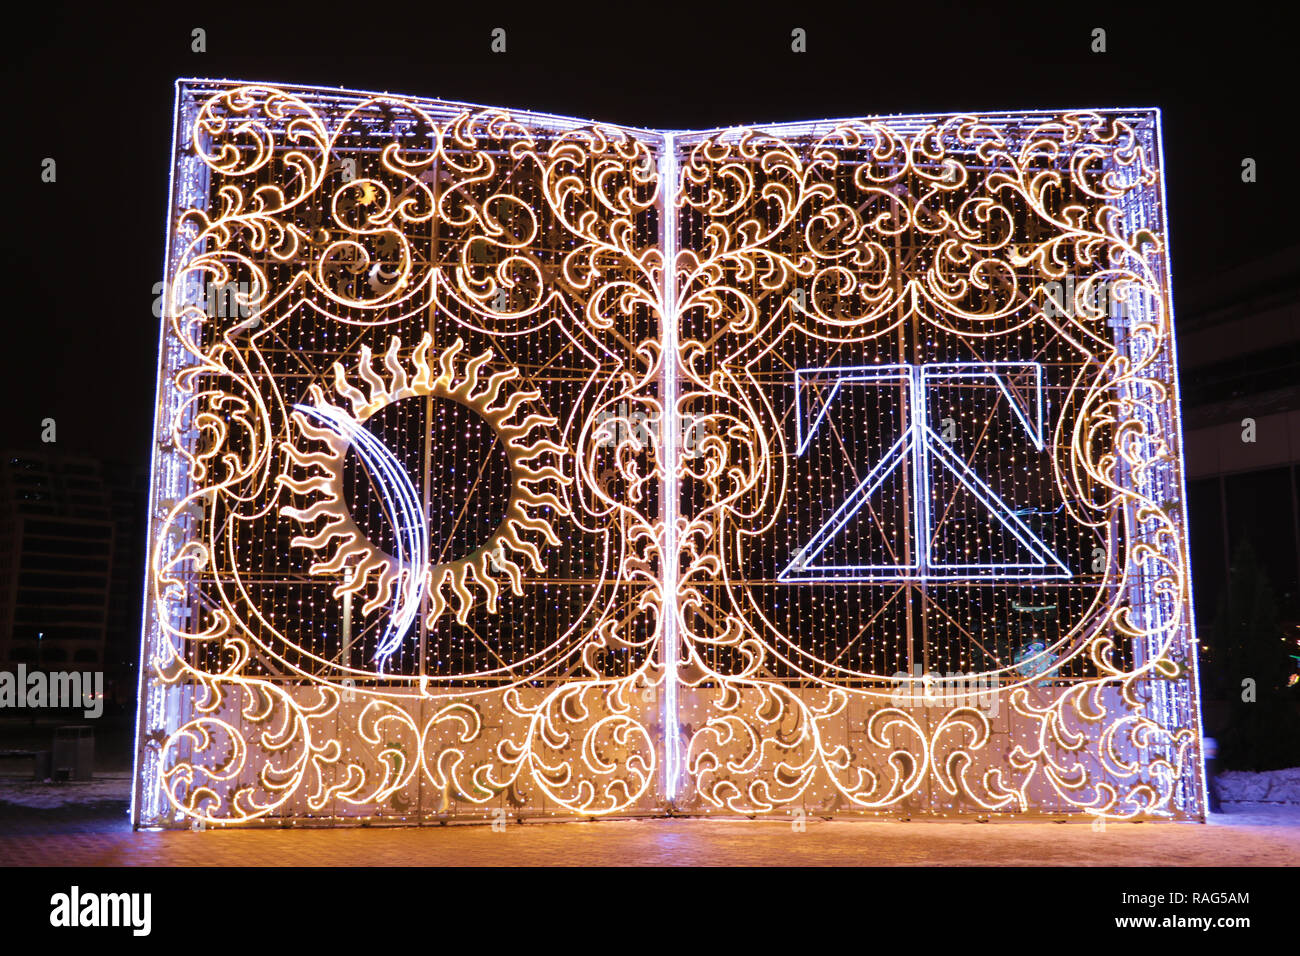 Minsk, Belarus - December 25, 2018: Installation of decorative book with lights near the National Library of Belarus. Sign of Skorina Stock Photo